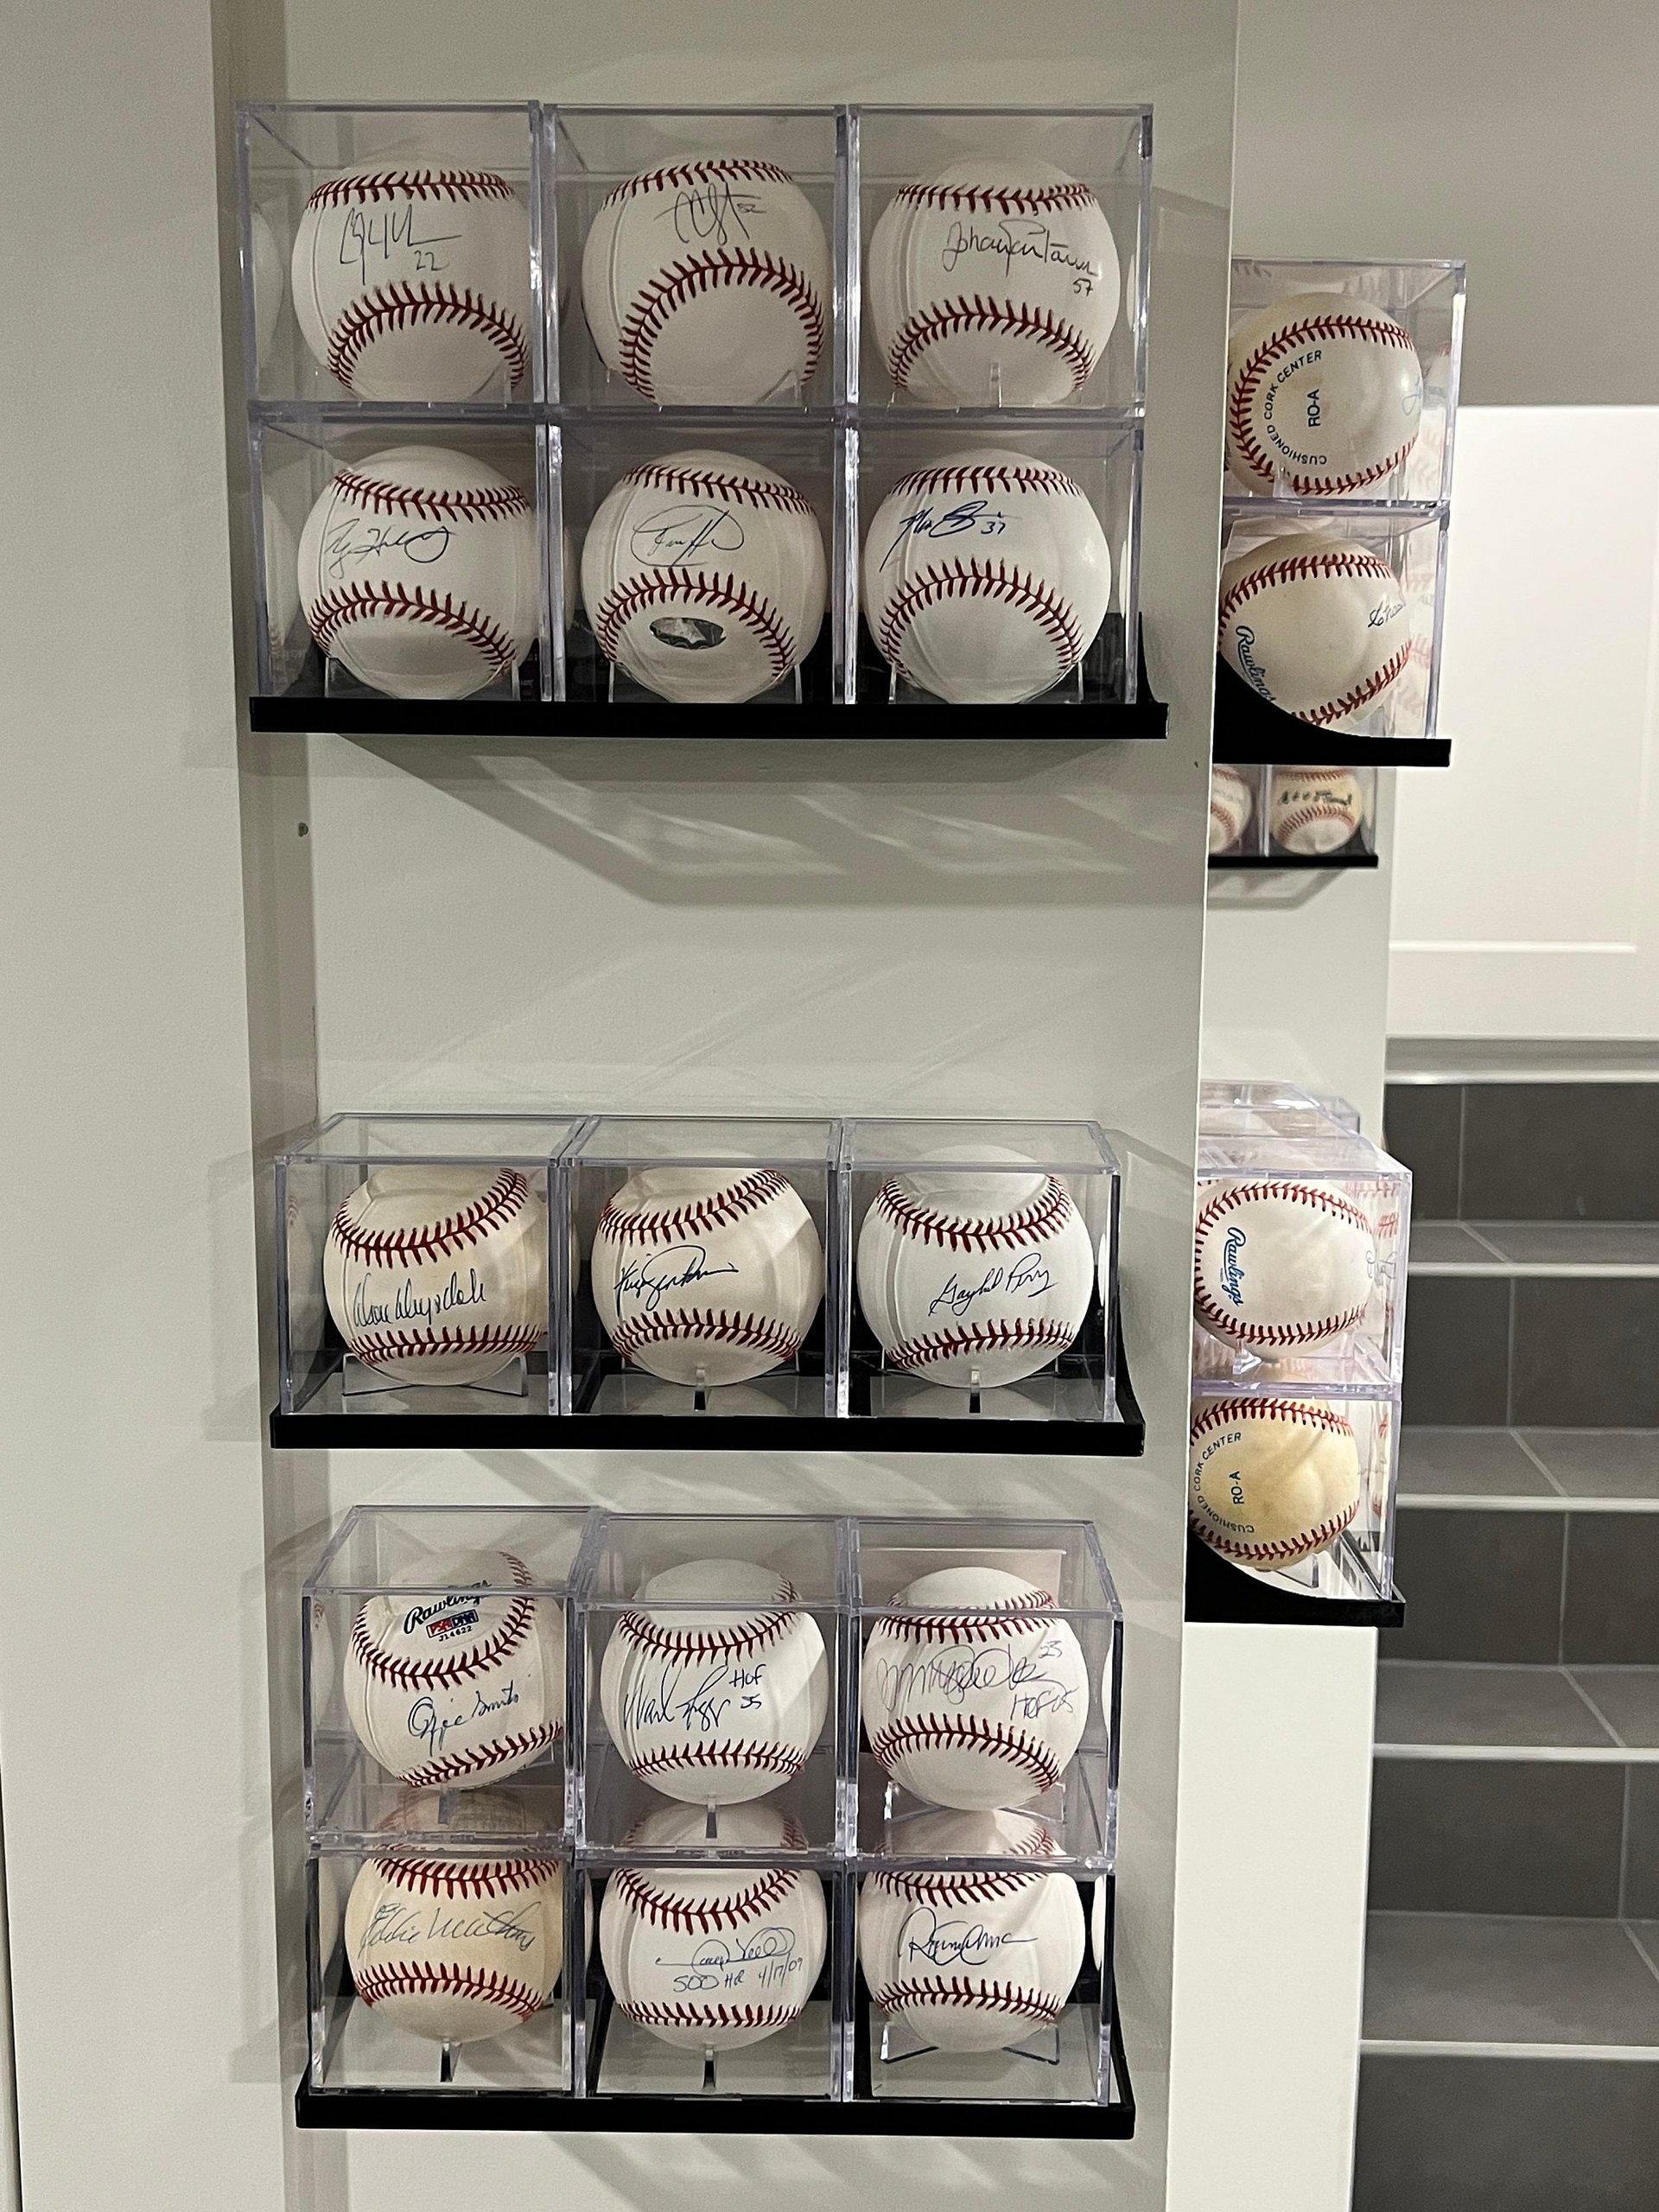 Baseball Triple Case Wall Display Holder (Case NOT INCLUDED)